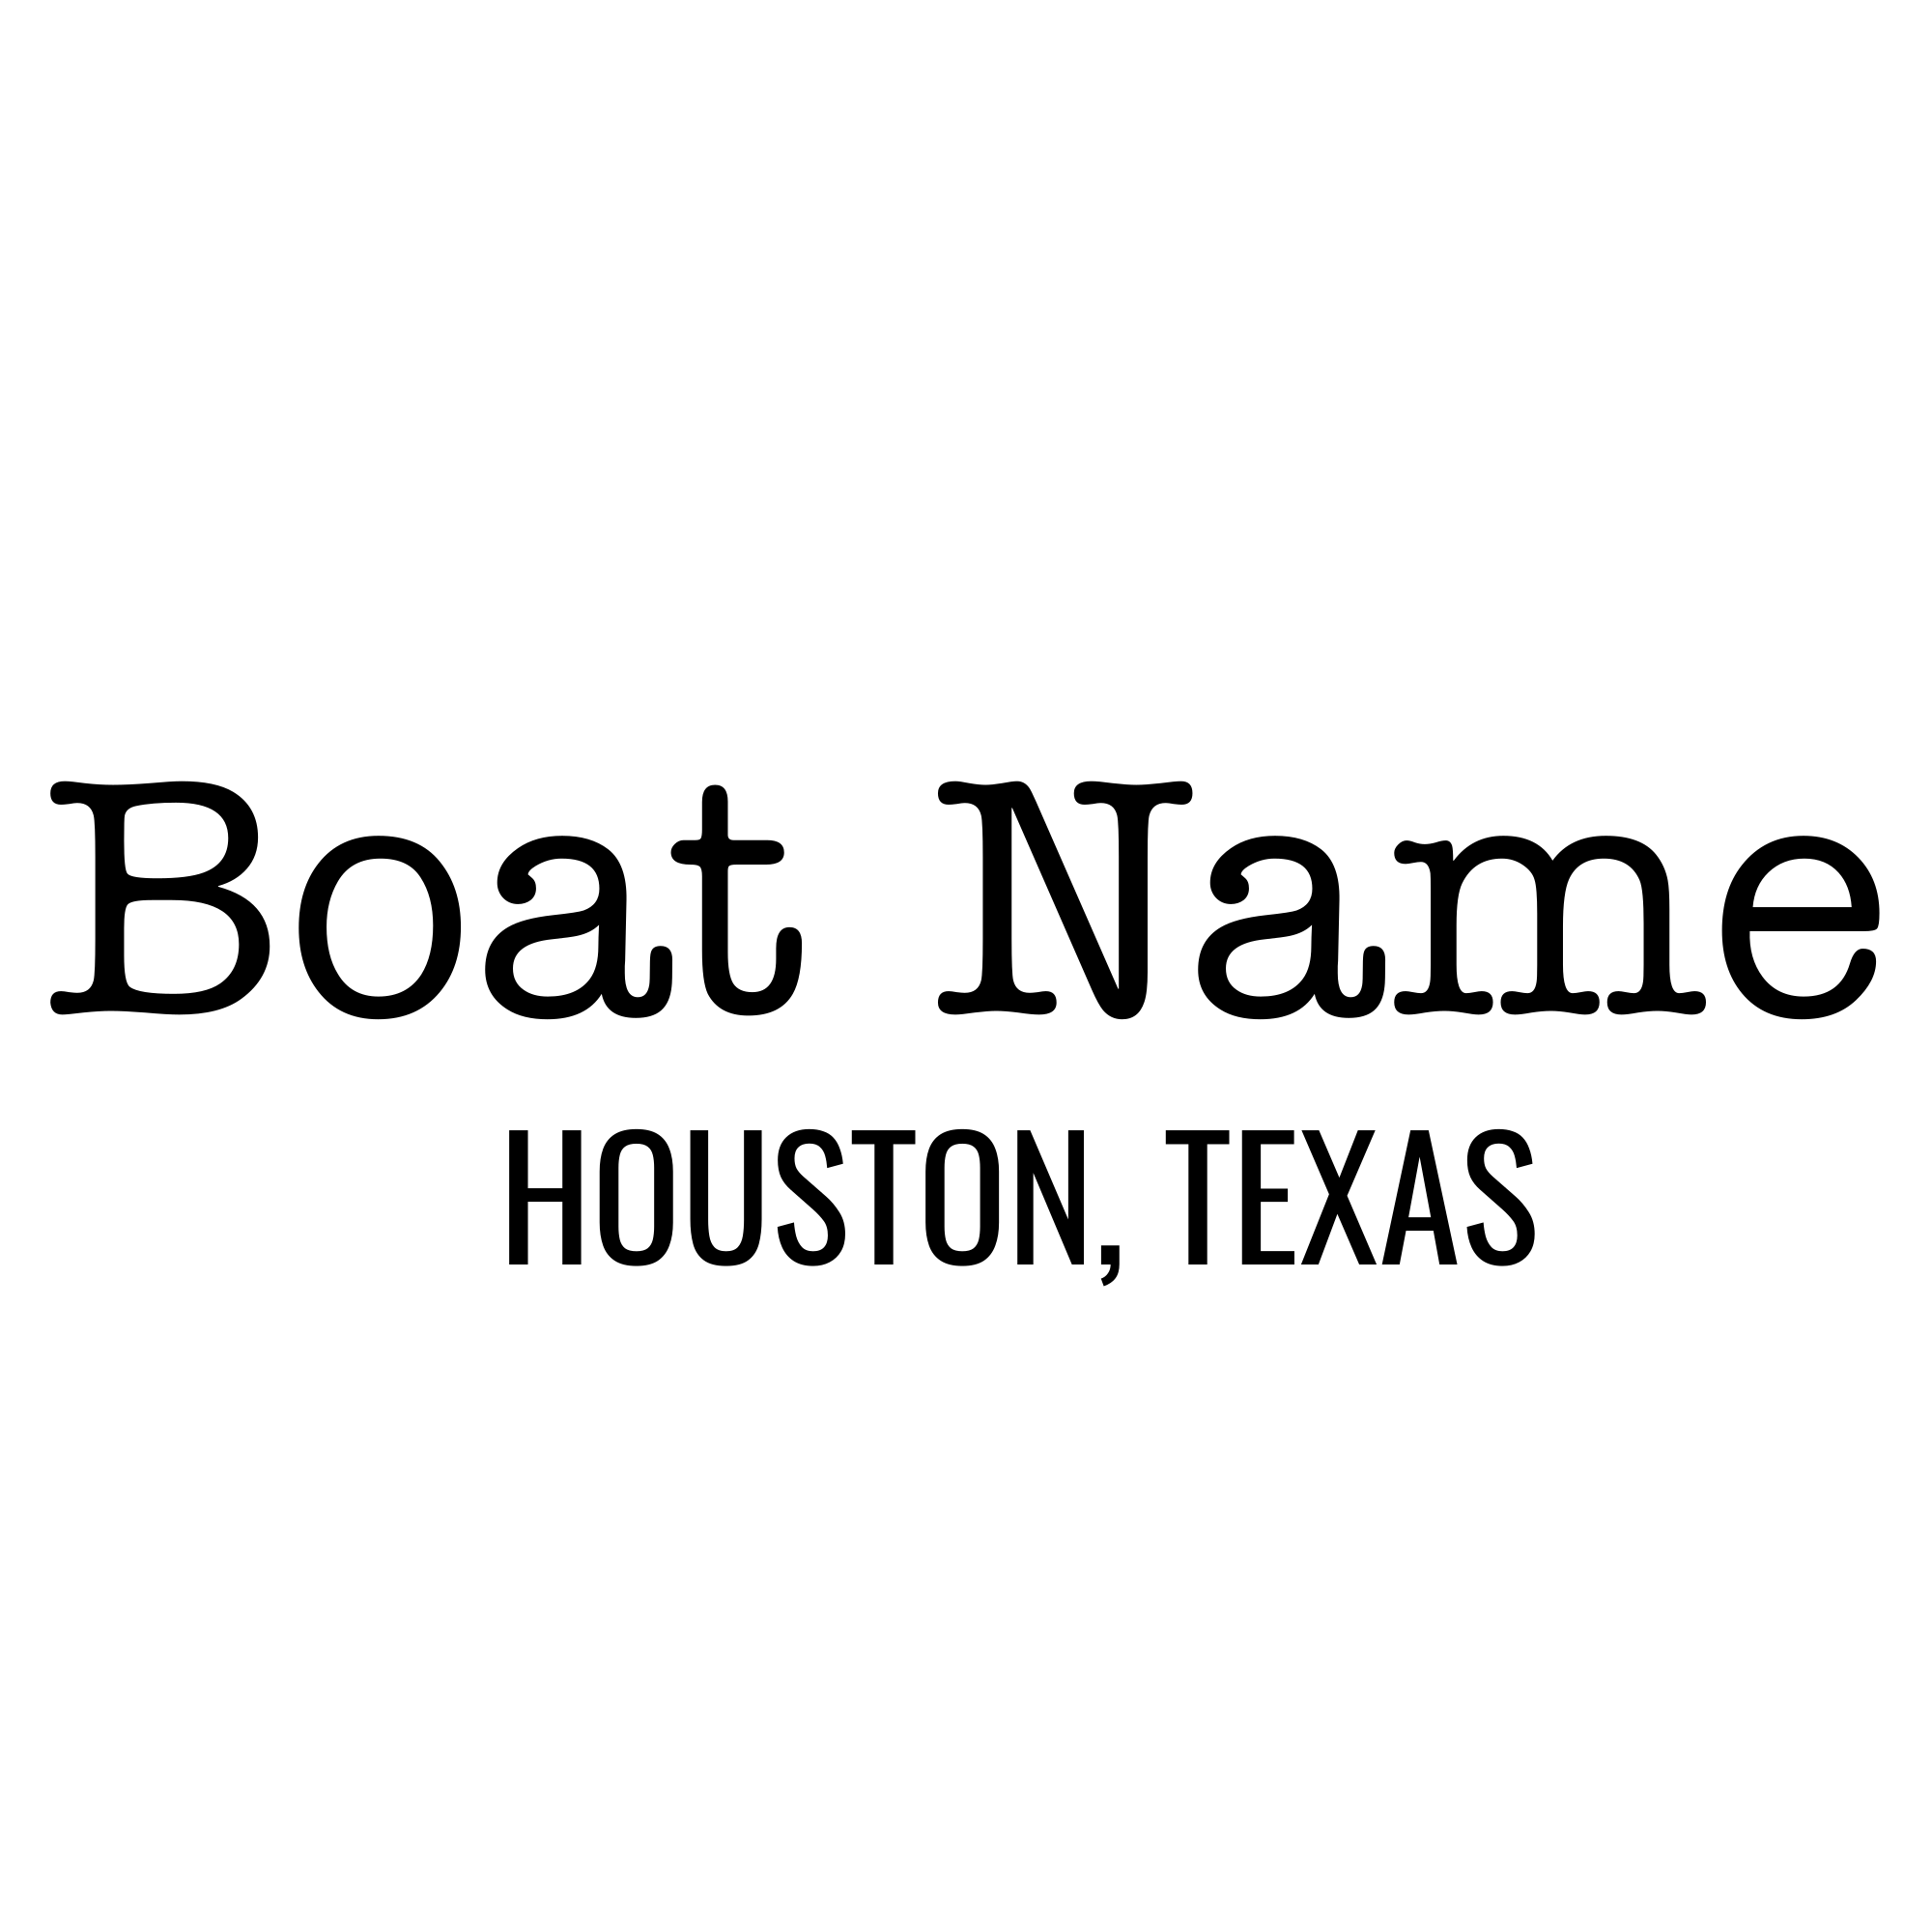 Personalized Boat Name Vinyl Decal with Hailing Port State - Permanent Marine-Grade for Signs, Speed boat, Fishing Vessel, Watercraft B9, B1